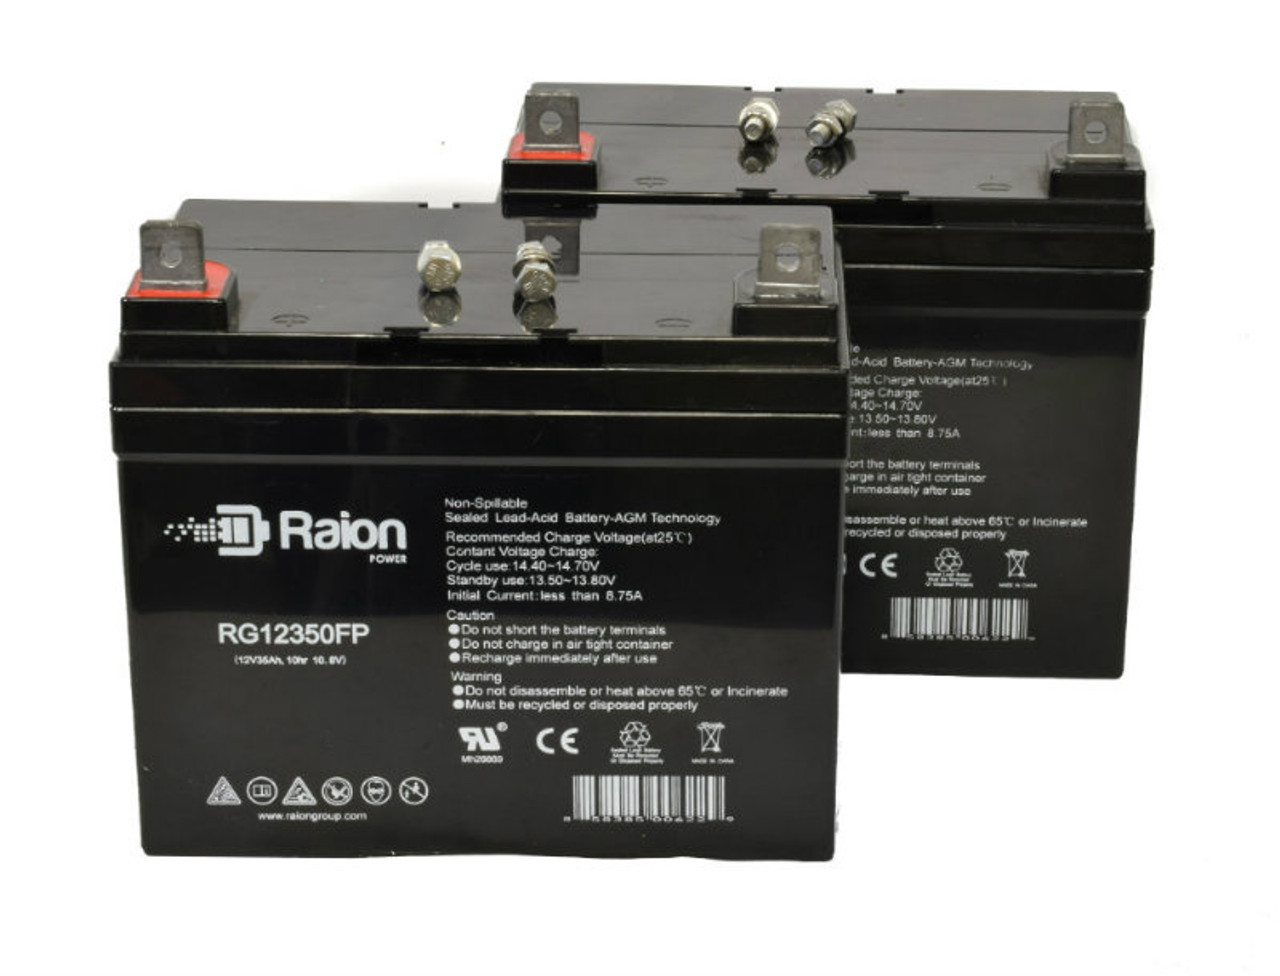 Raion Power Replacement 12V 35Ah Lawn Mower Battery for Ingersol Equipment 810 - 2 Pack